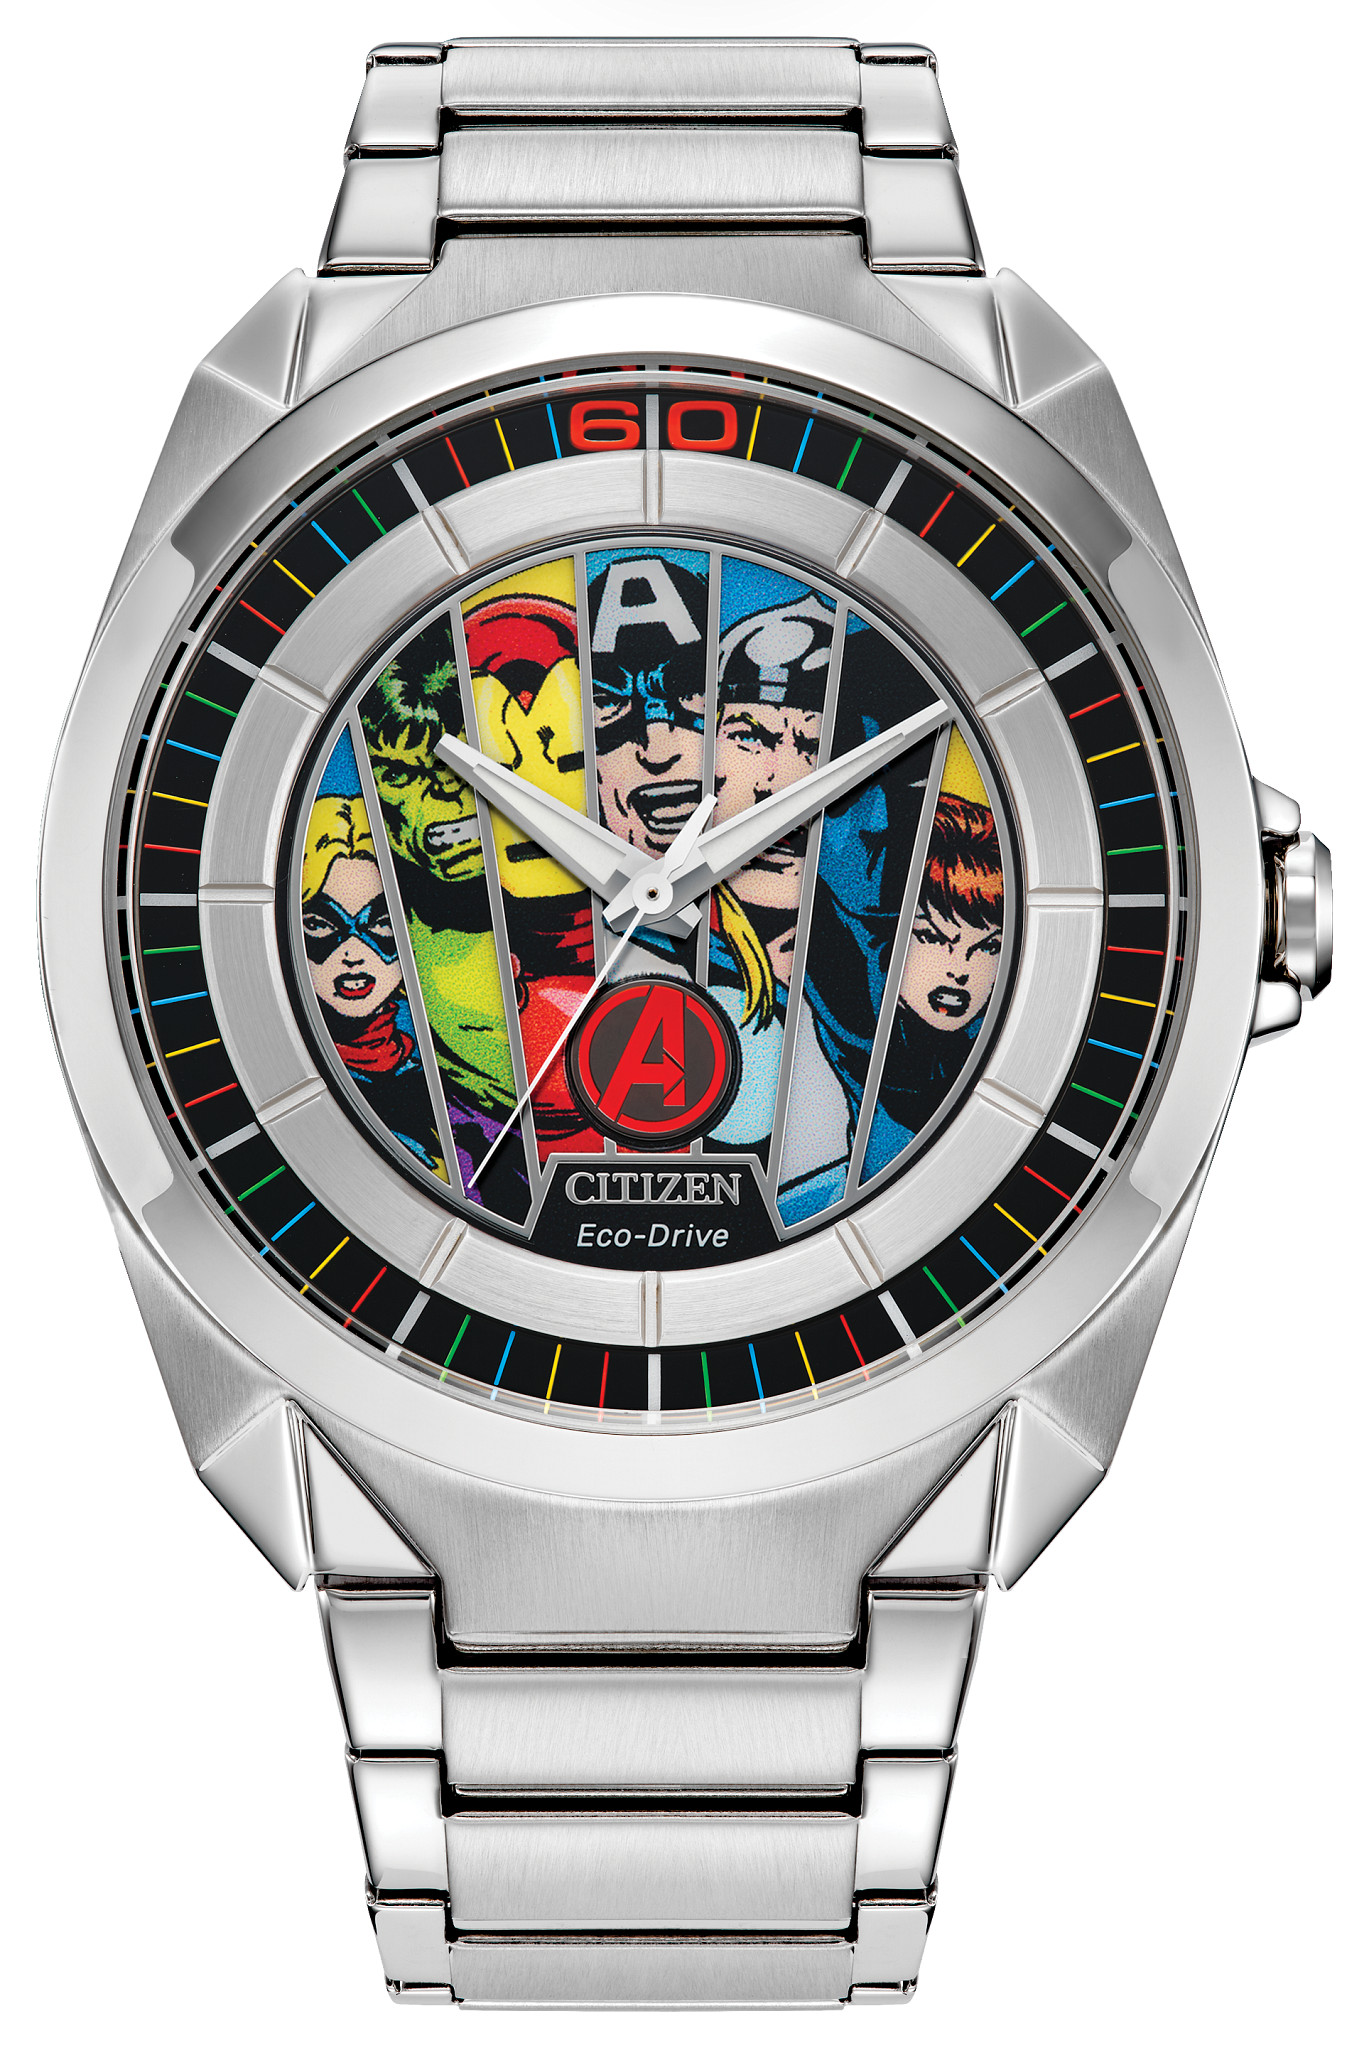 Buy Accutime Marvel Avengers Villains Digital Men's Watch - Silicone Strap,  LED Display, Male, Digital Wrist Watch in Multi (Model: AAV1363AZ) Online  at Lowest Price Ever in India | Check Reviews &